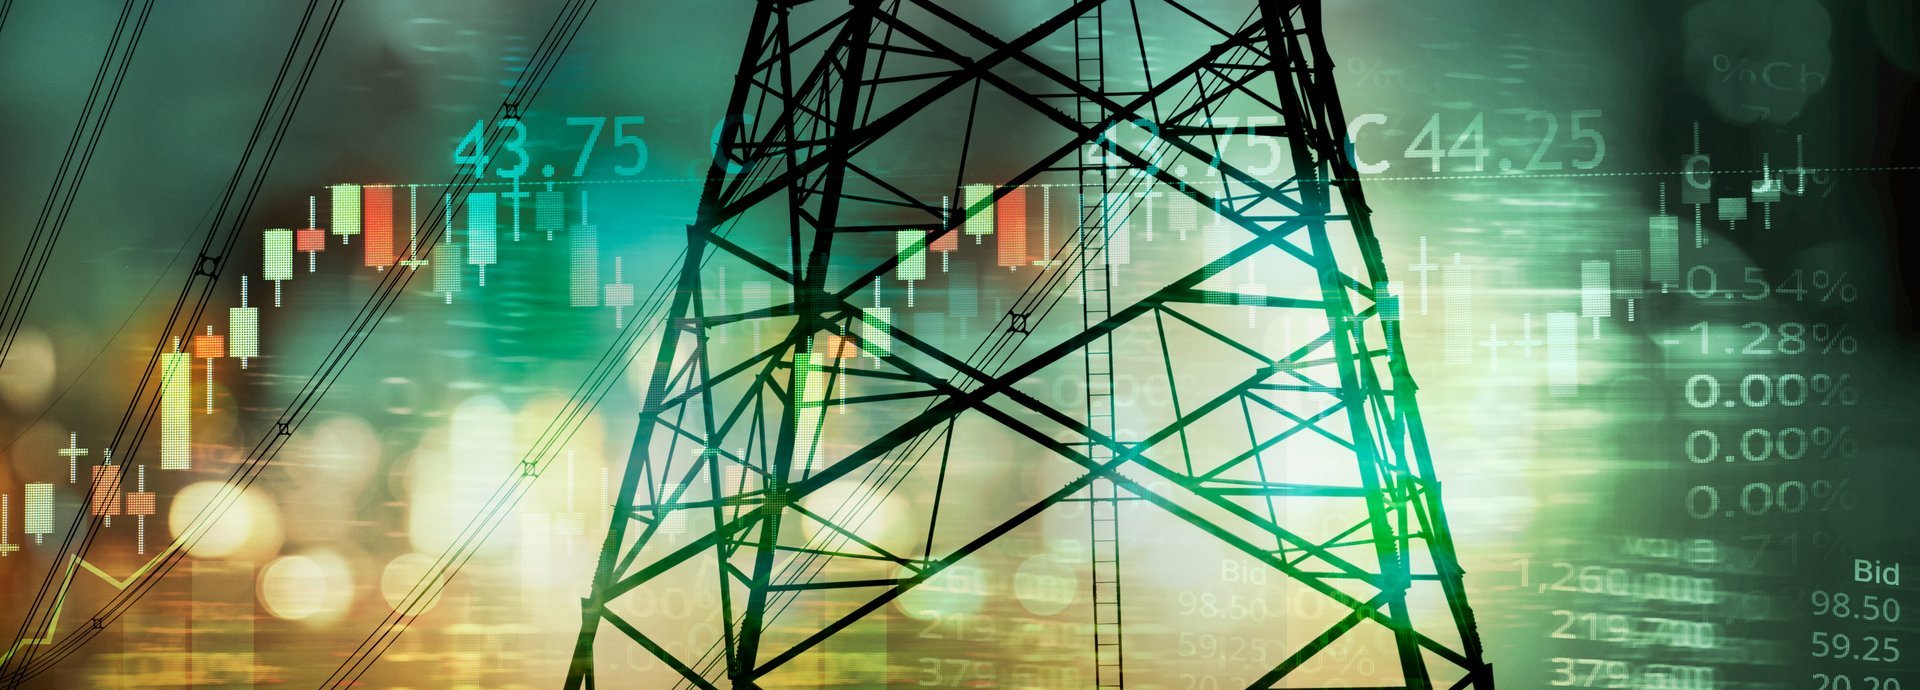 market stock graph and information with city green blue light and electricity pole and energy facility industry and business background